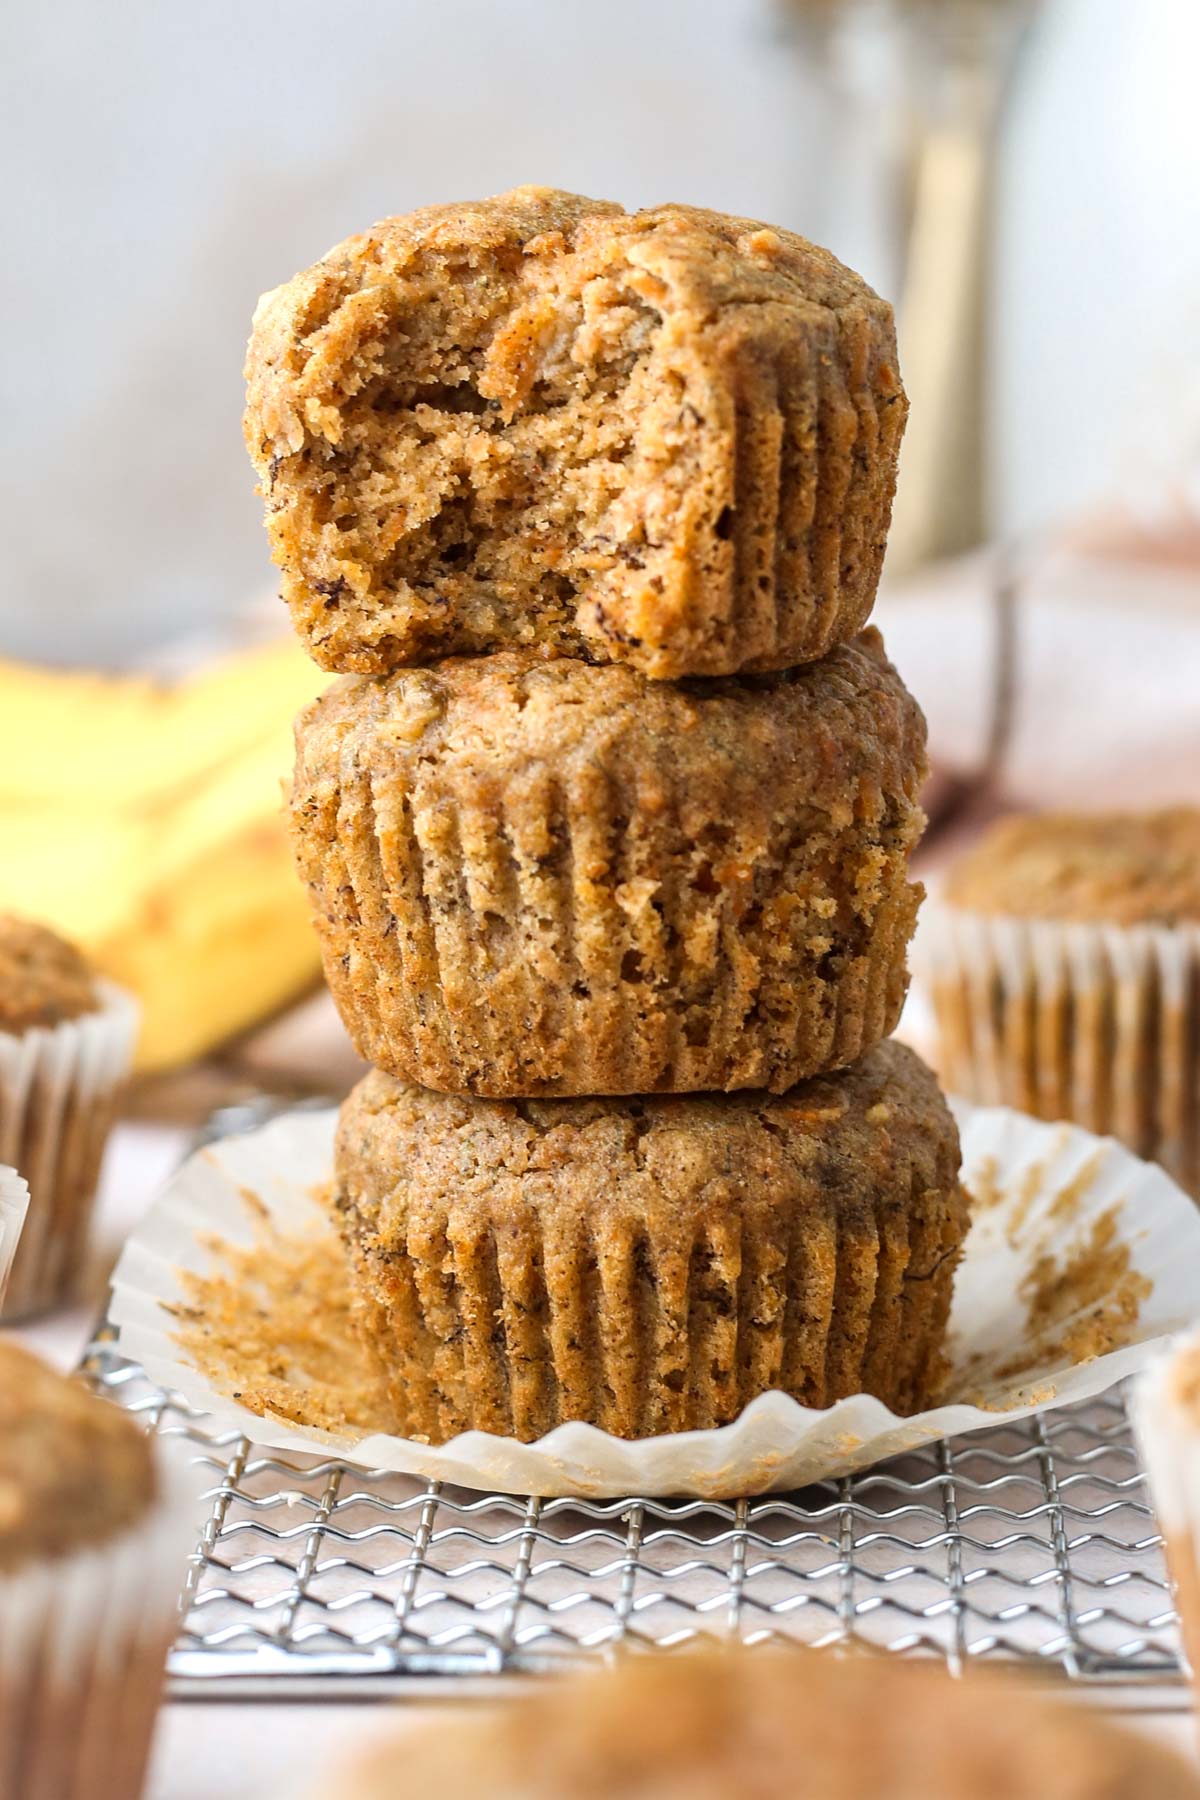 a stack of three healthy carrot banana muffins with the top muffin missing a bite, showing the fluffy texture inside.